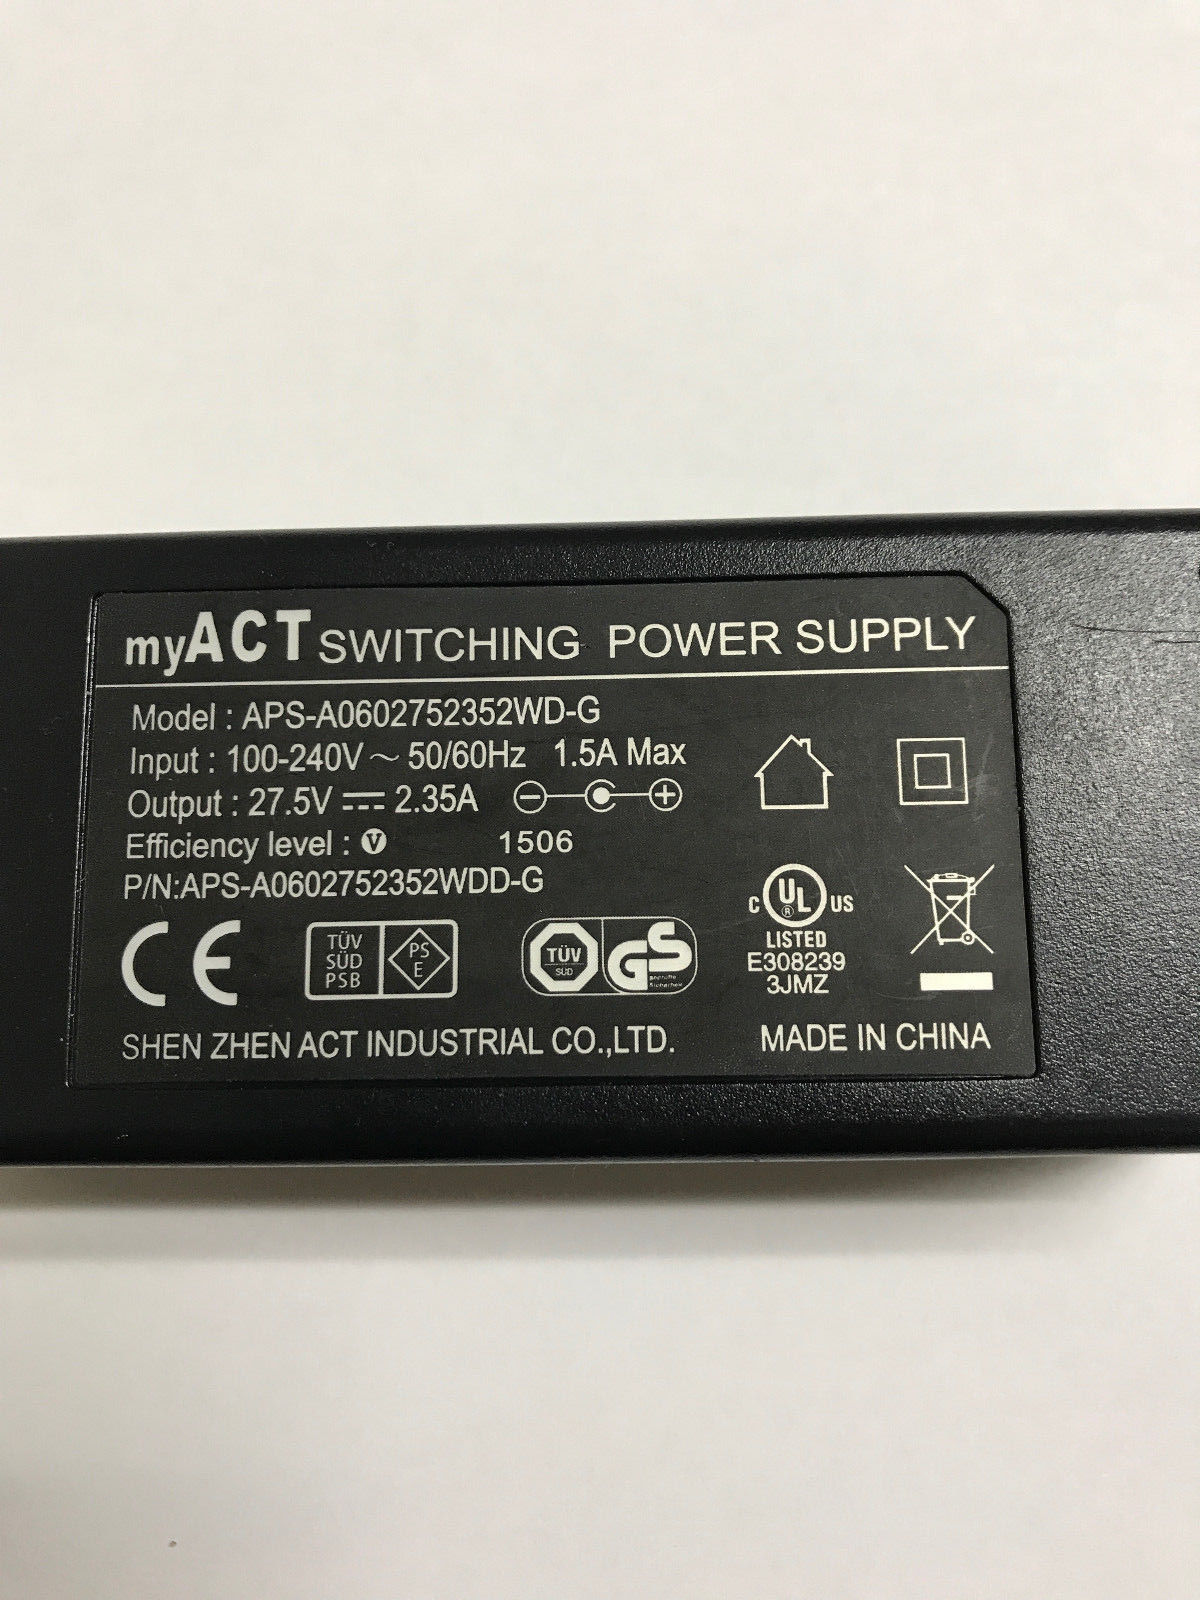 NEW 27.5V 2.35A MyACT APS-A0602752352WD-G switching Power AC Adapter For Samsung Soundbar HW-650